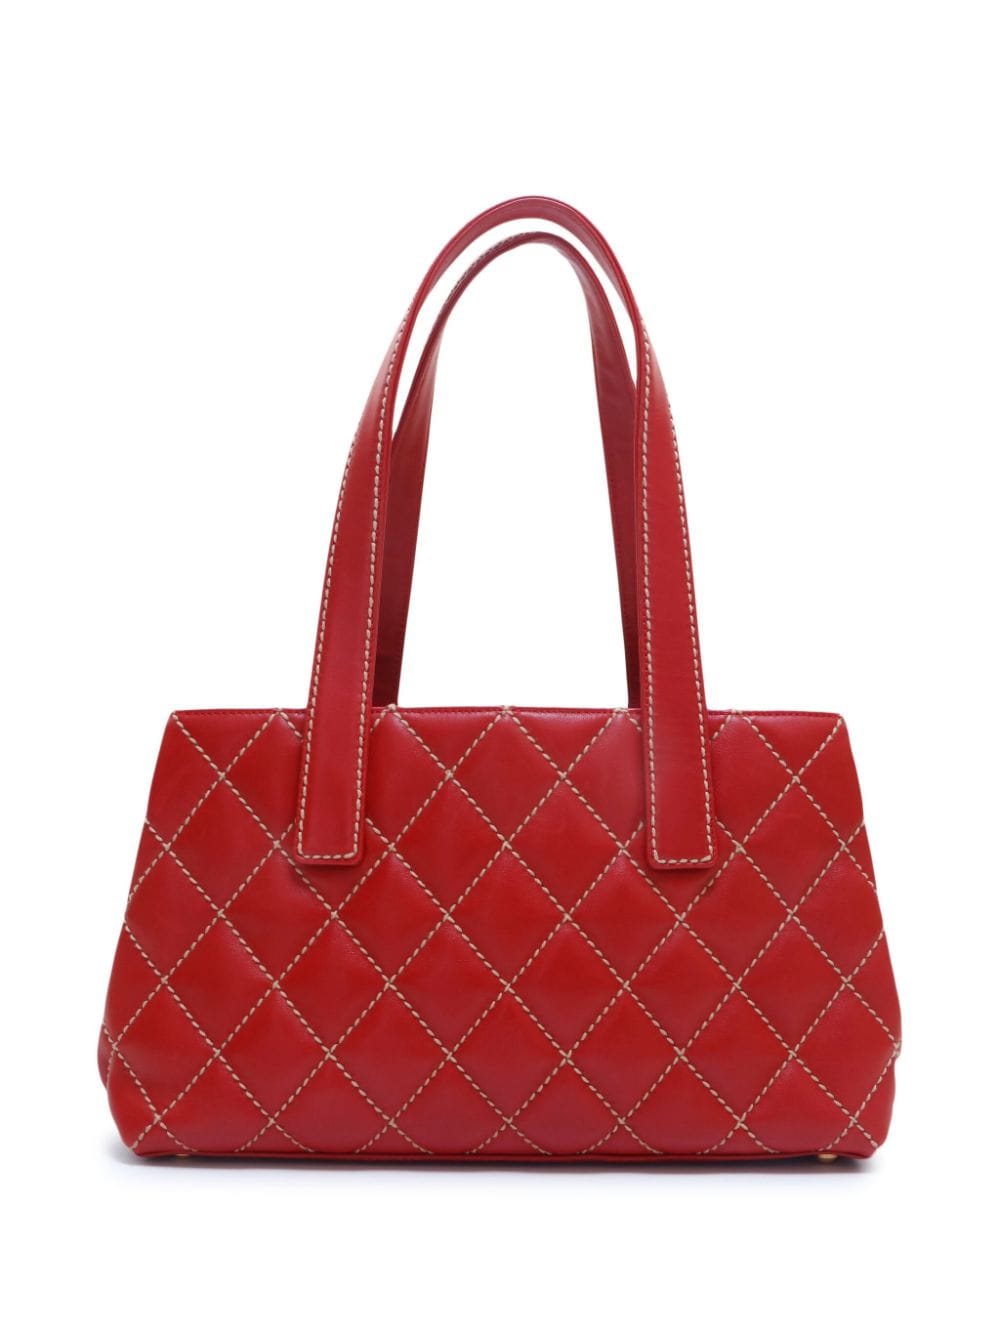 Pre-owned Chanel Wild Stitch 手提包（2002年典藏款） In Red